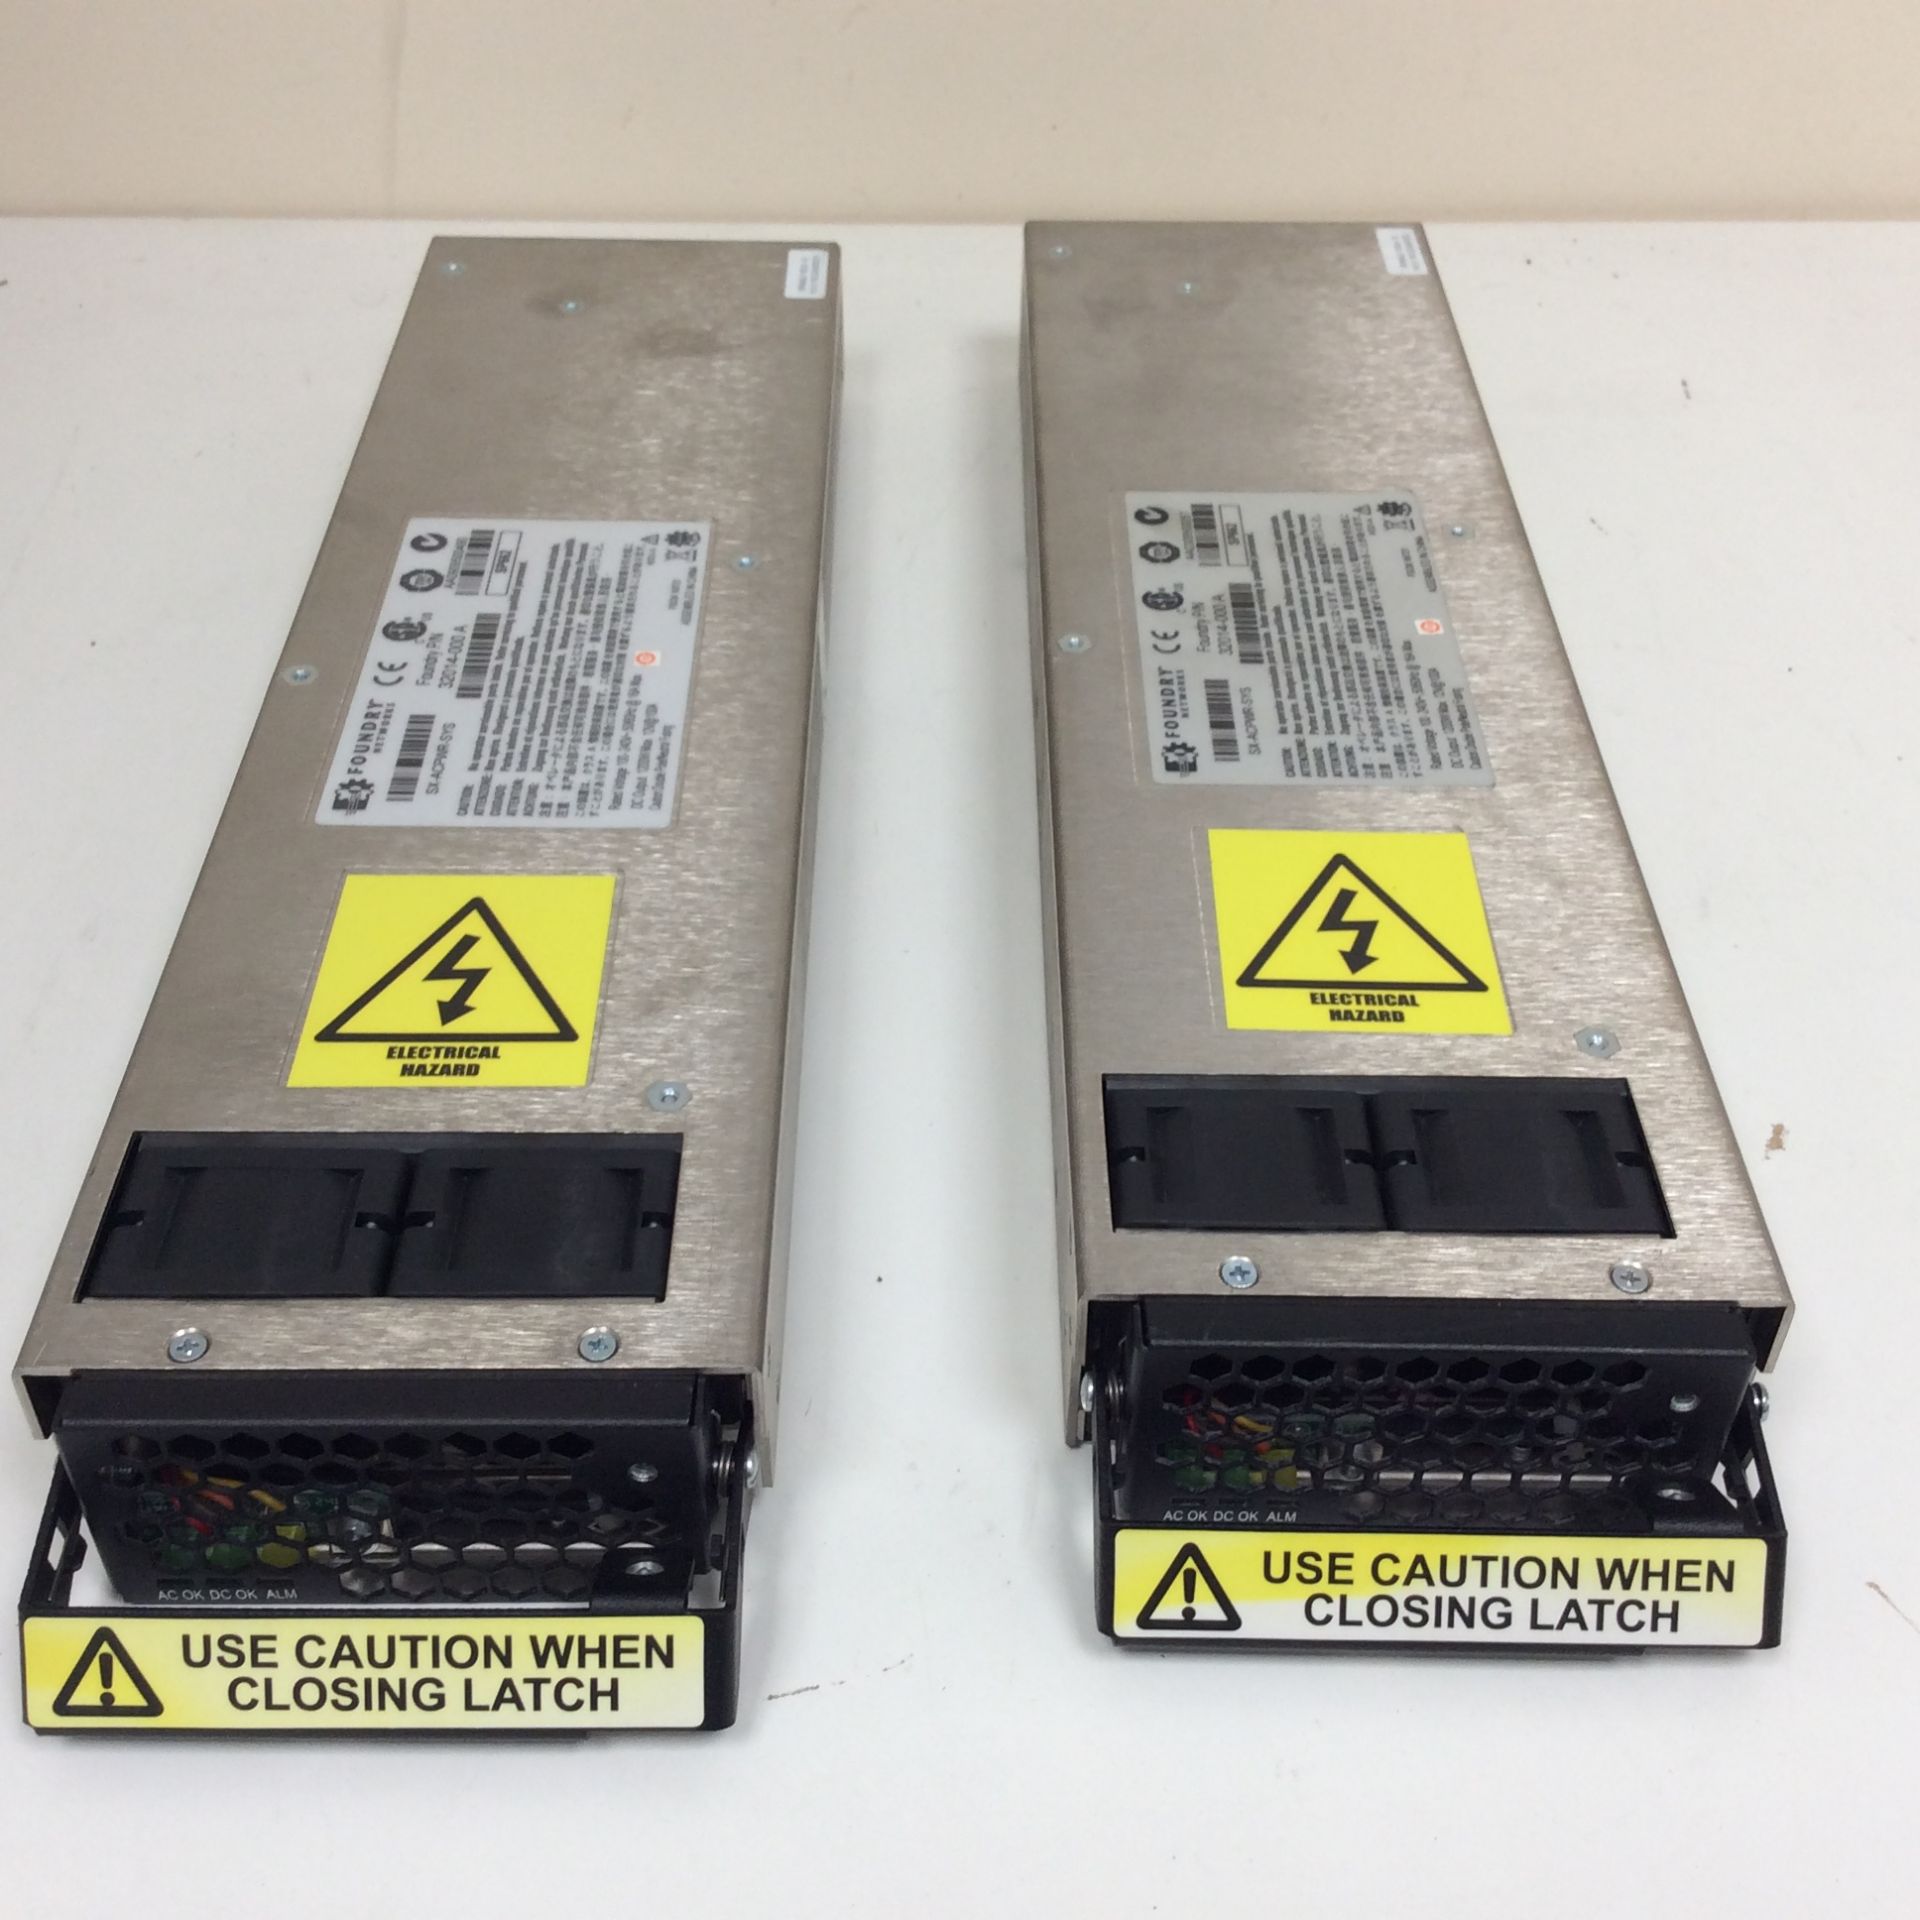 2x foundry networks power supply 32014-000 - Image 2 of 3